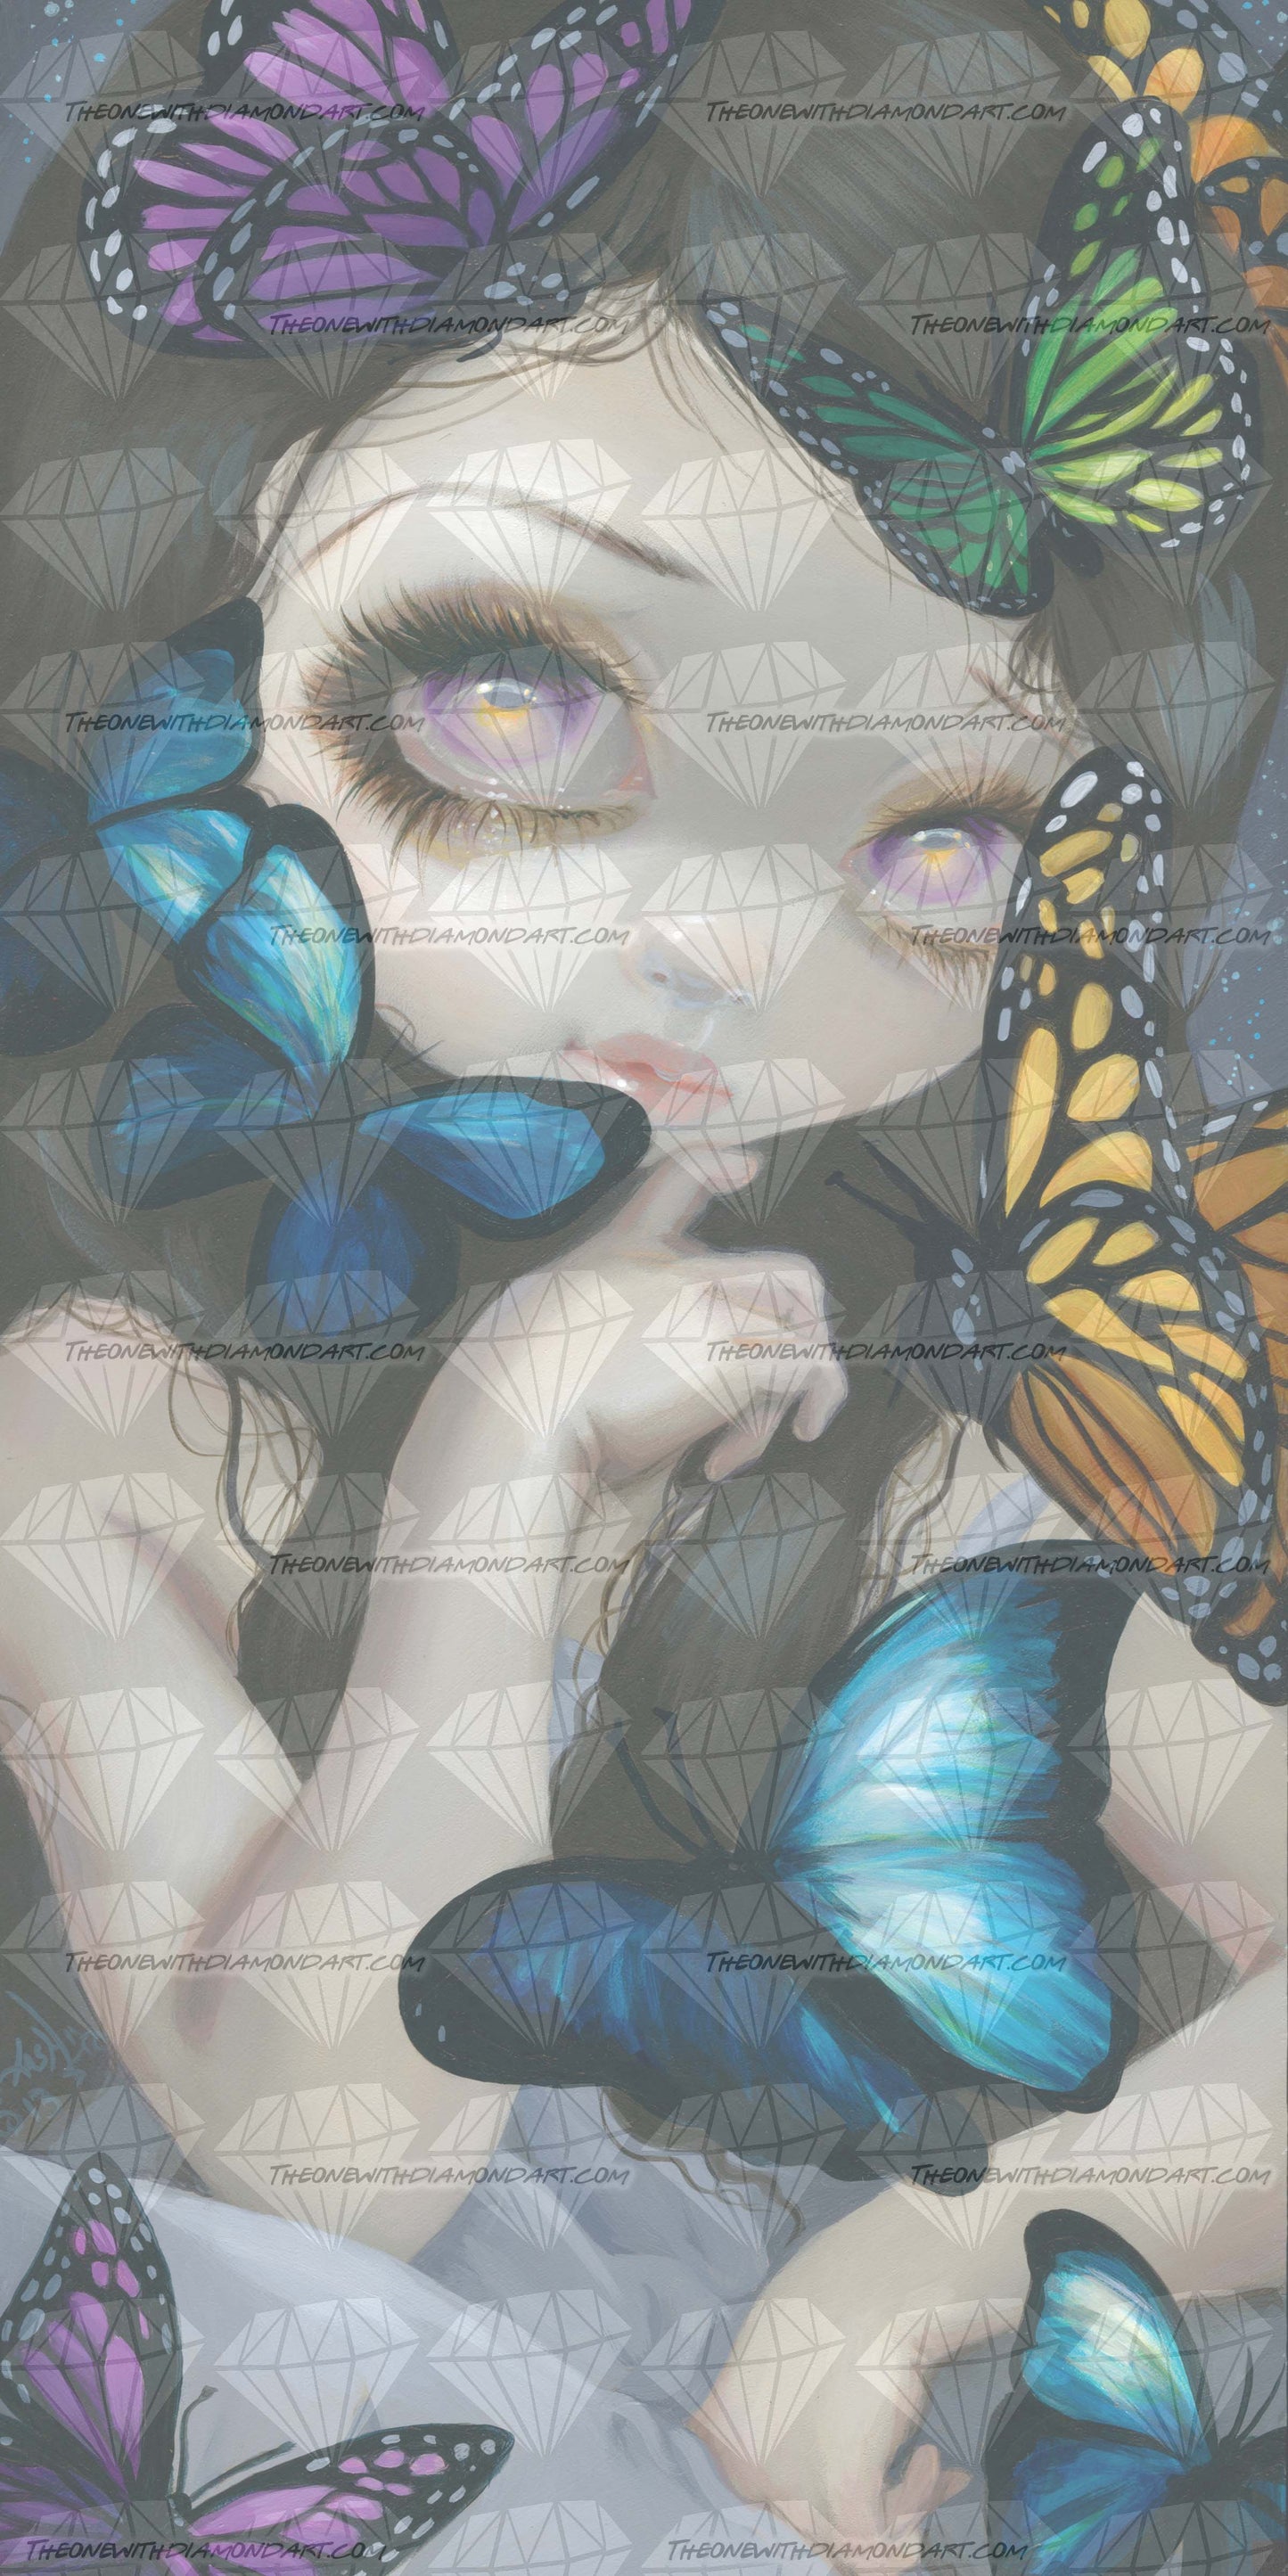 A Confusion Of Wings ©Jasmine Becket-Griffith